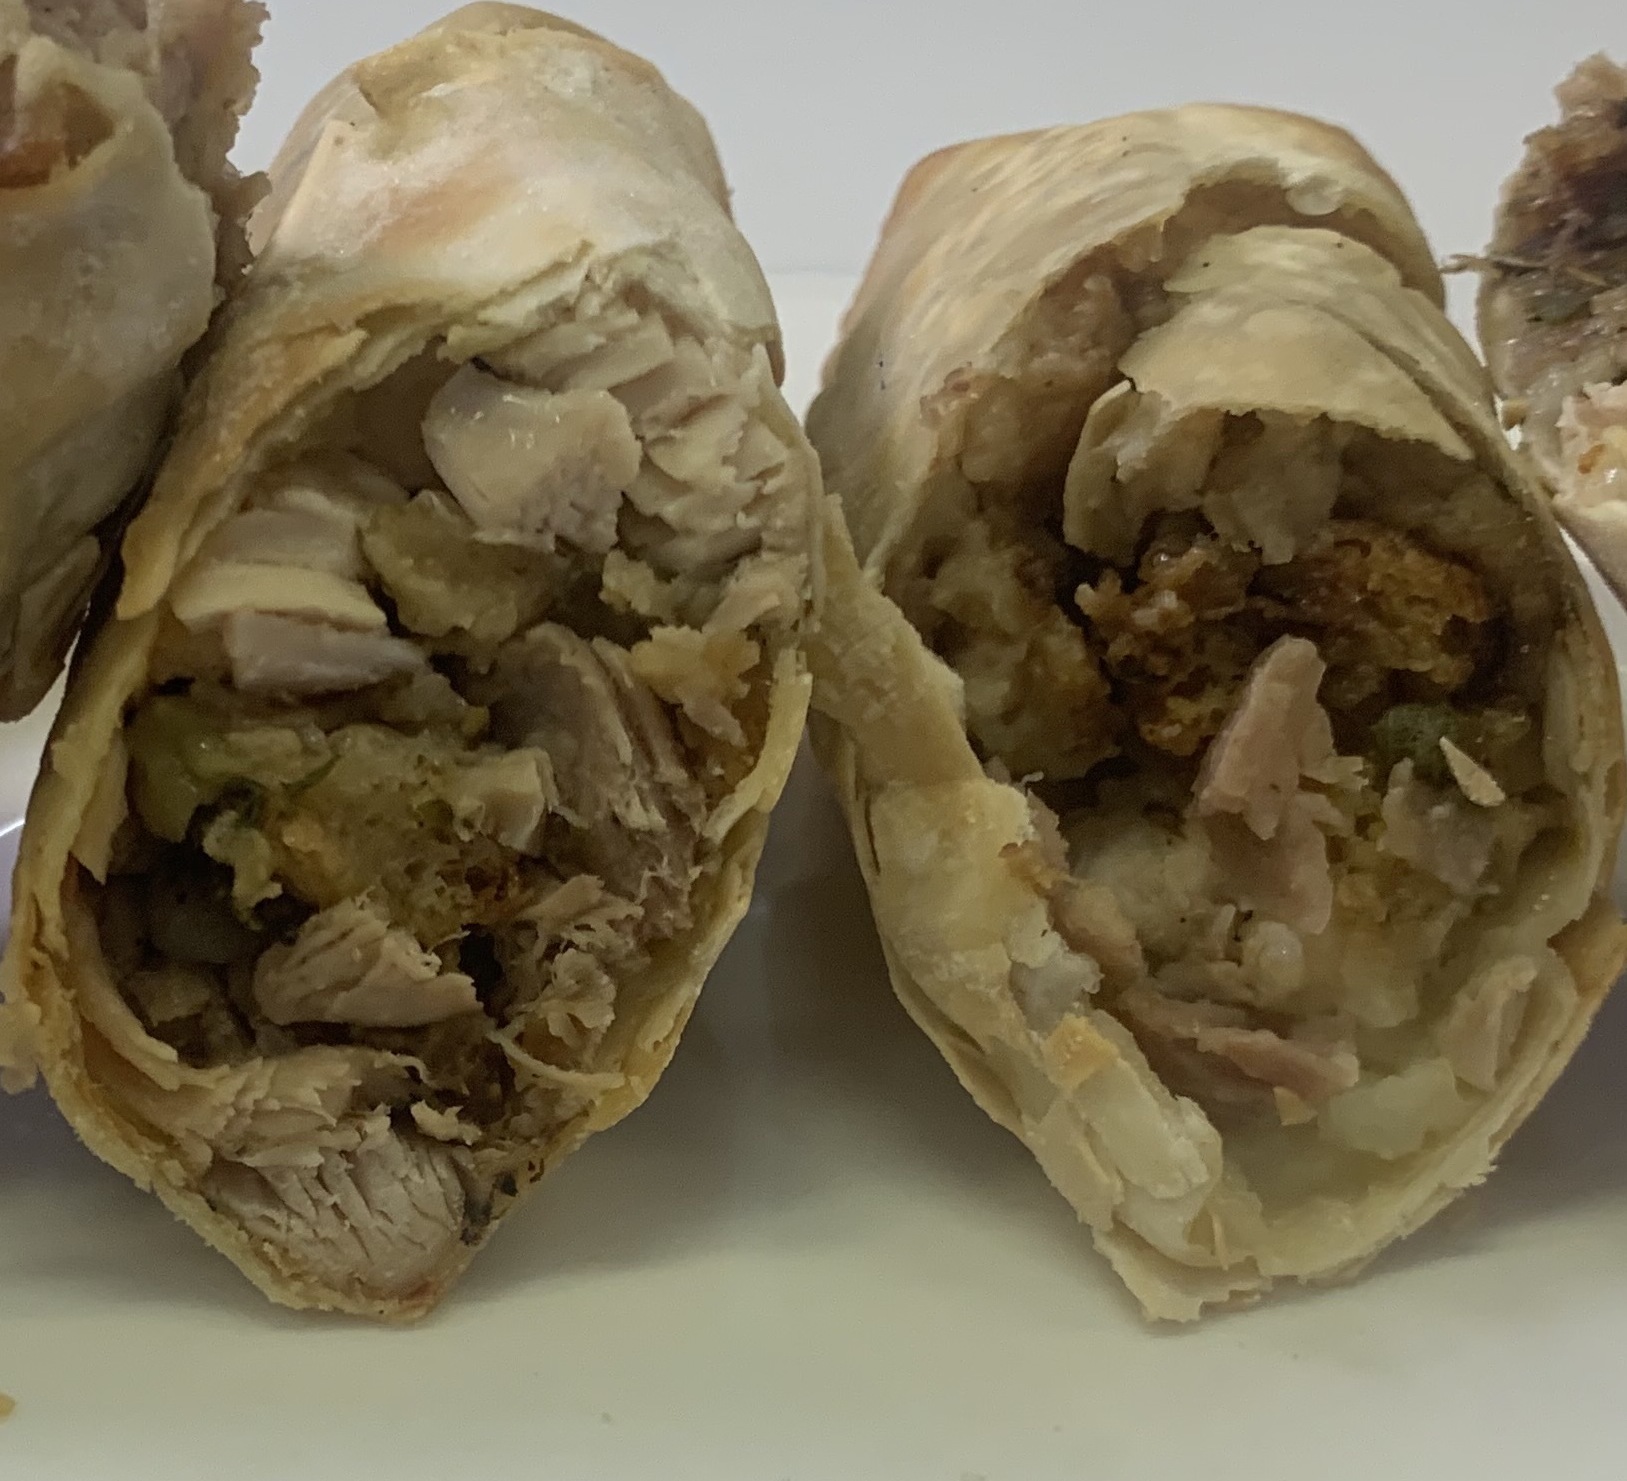 cooked egg rolls cut in half showing Thanksgiving leftovers inside